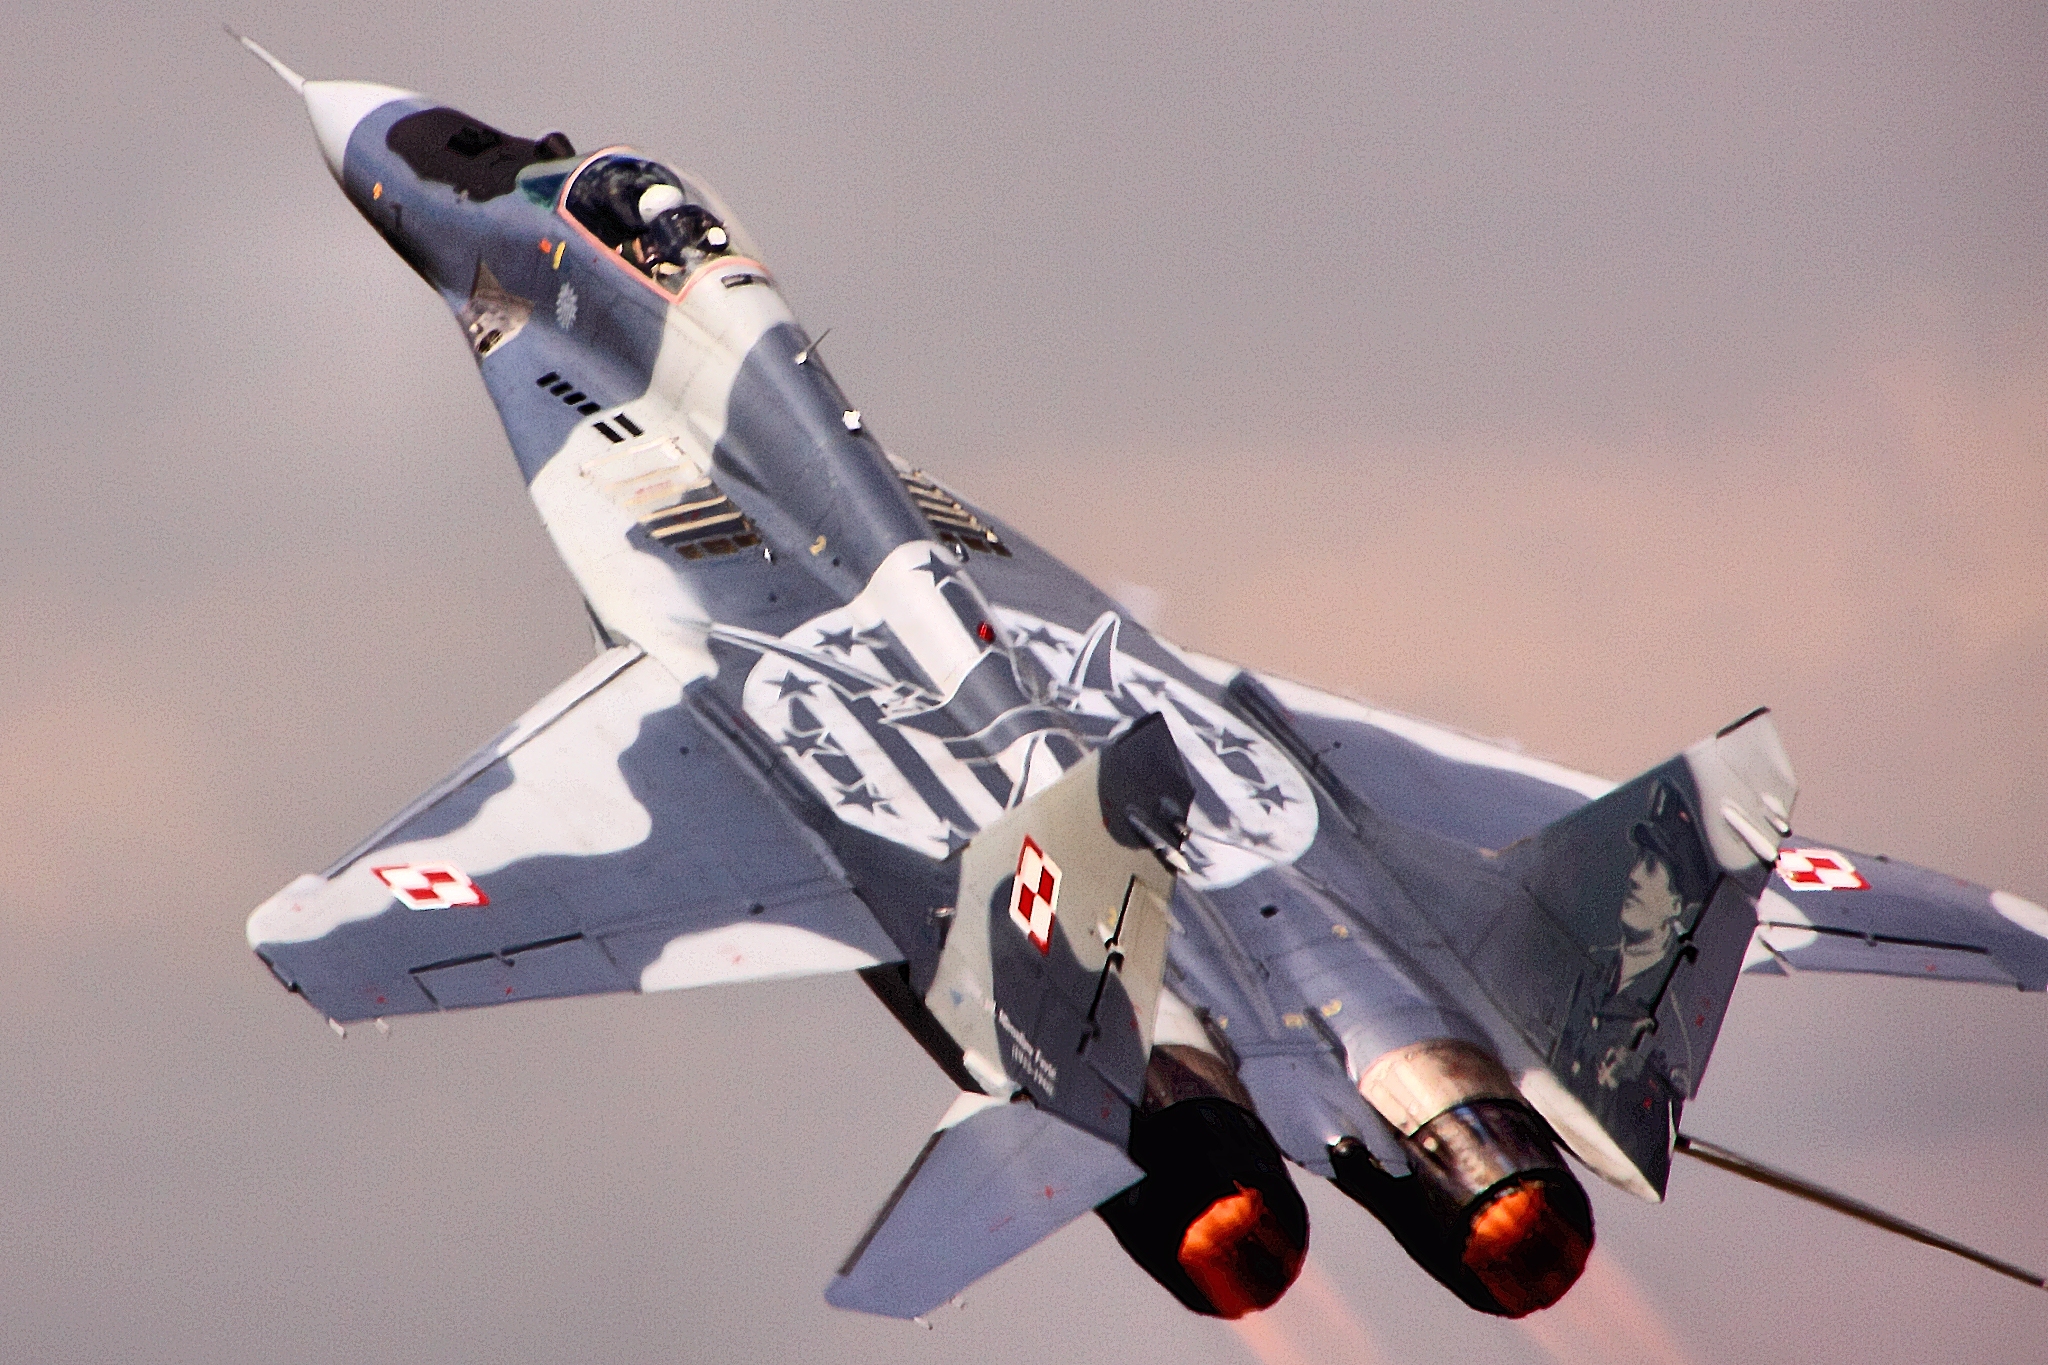 Poland will not hand over all of its MiG-29 fighters to Ukraine